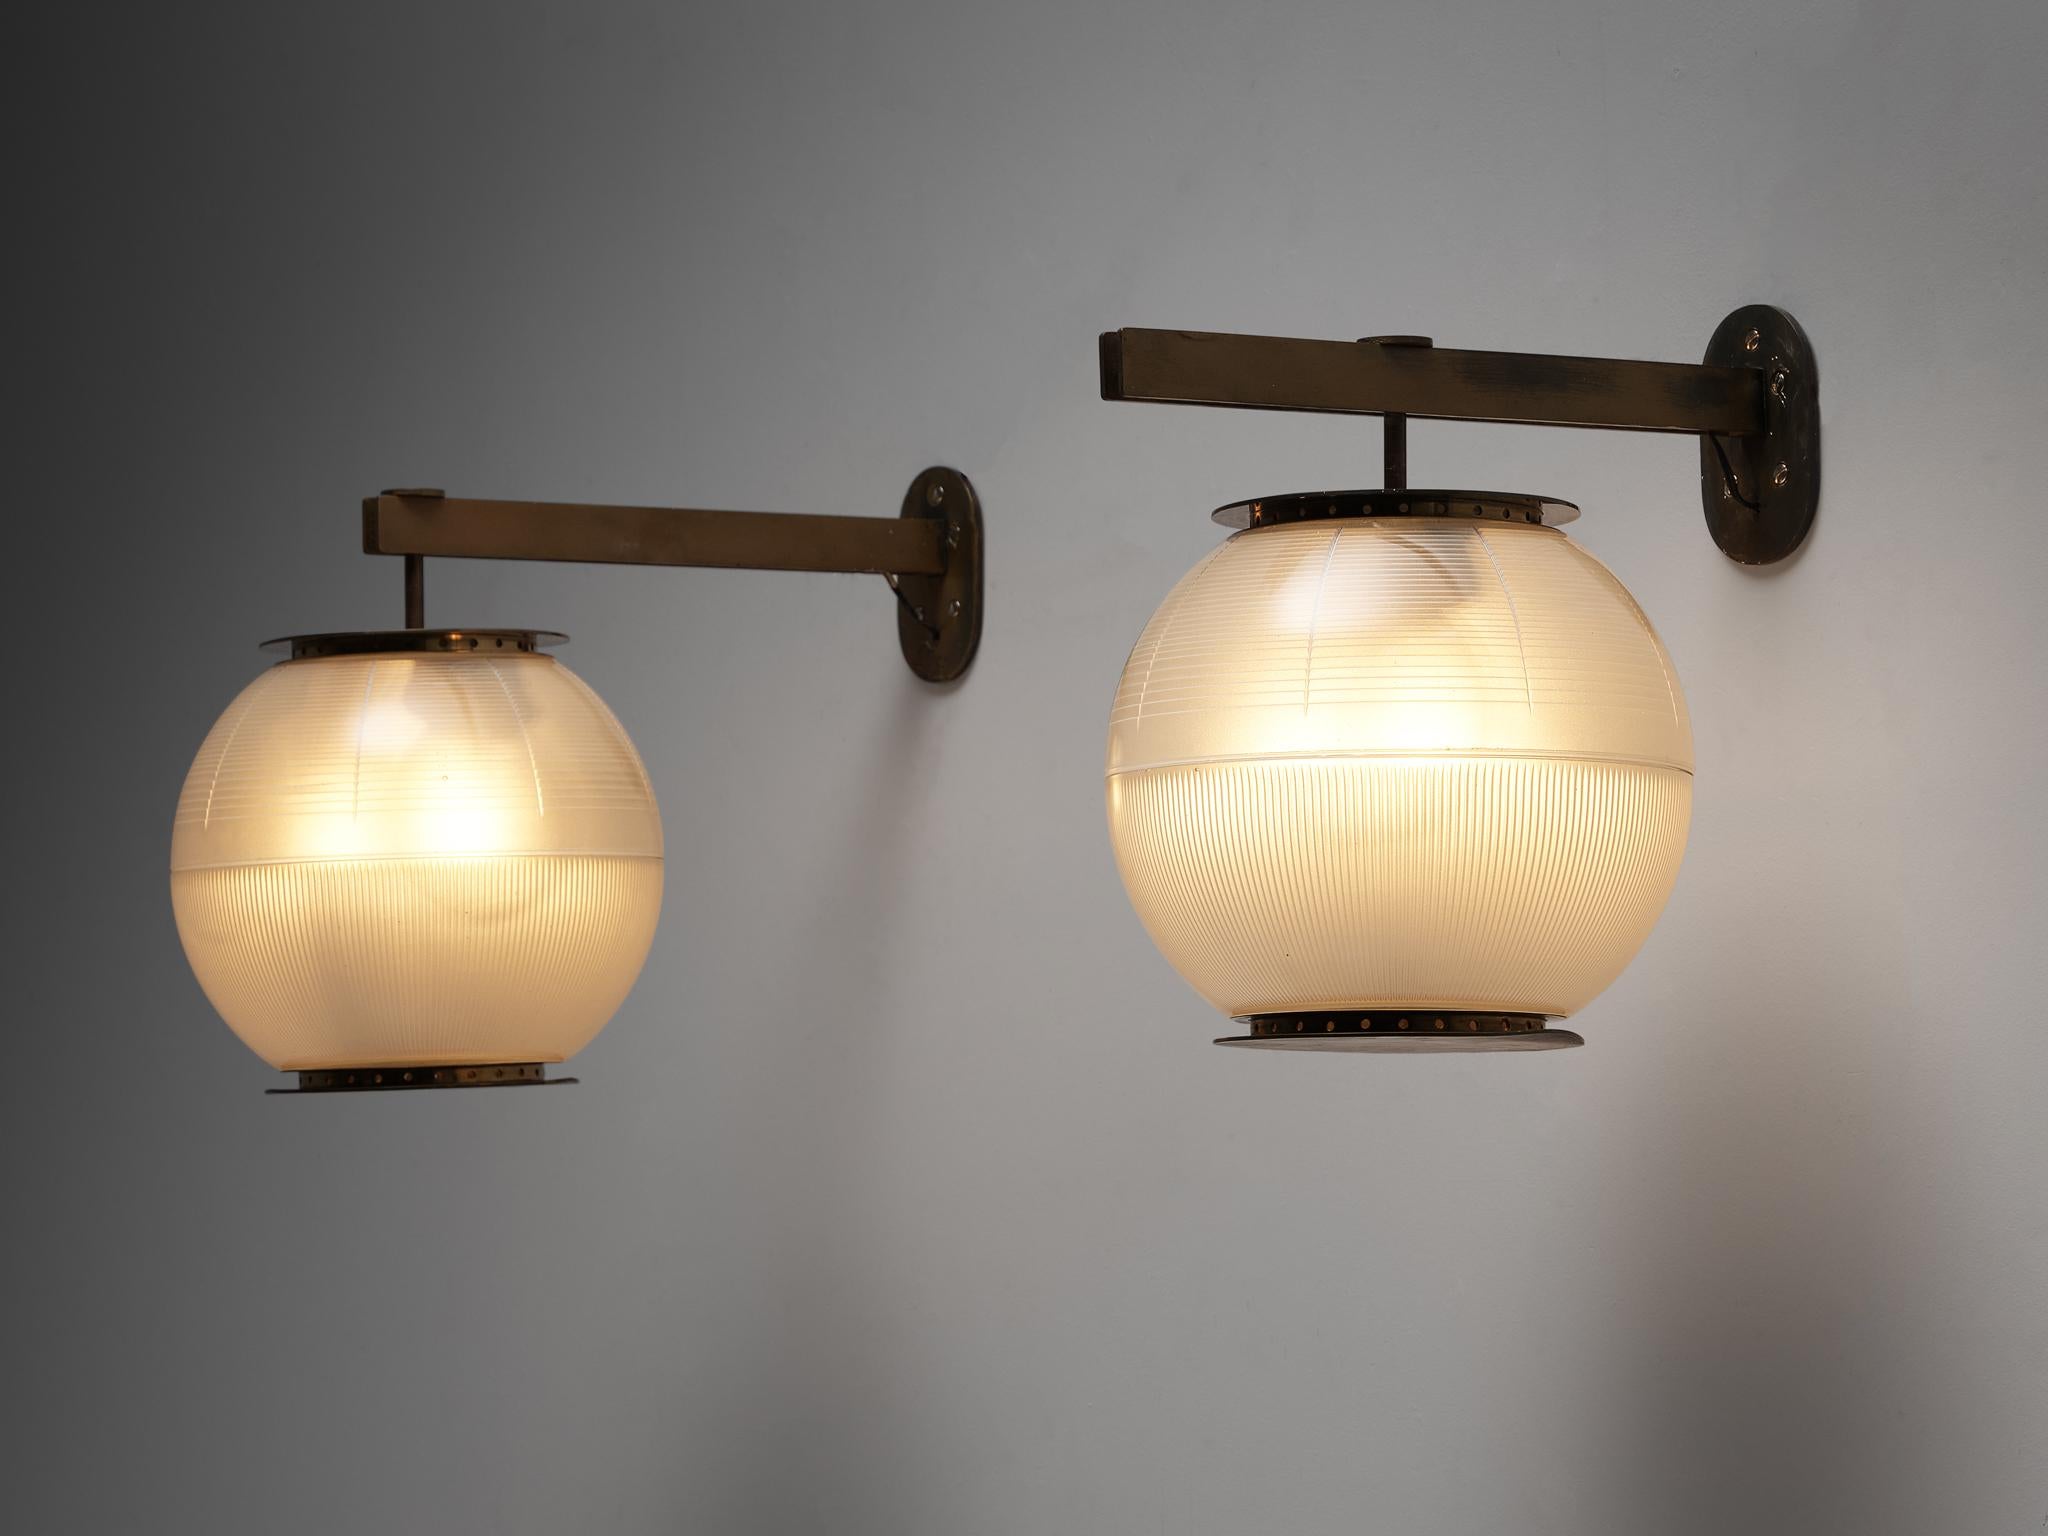 Ignazio Gardella for Azucena, wall sconces LP7, brass and glass, Italy, 1955

A set of wall lights by the designer and architect Ignazio Gardella. The glass spheres are adjustable by moving them closer or further from the wall. The brass stem has